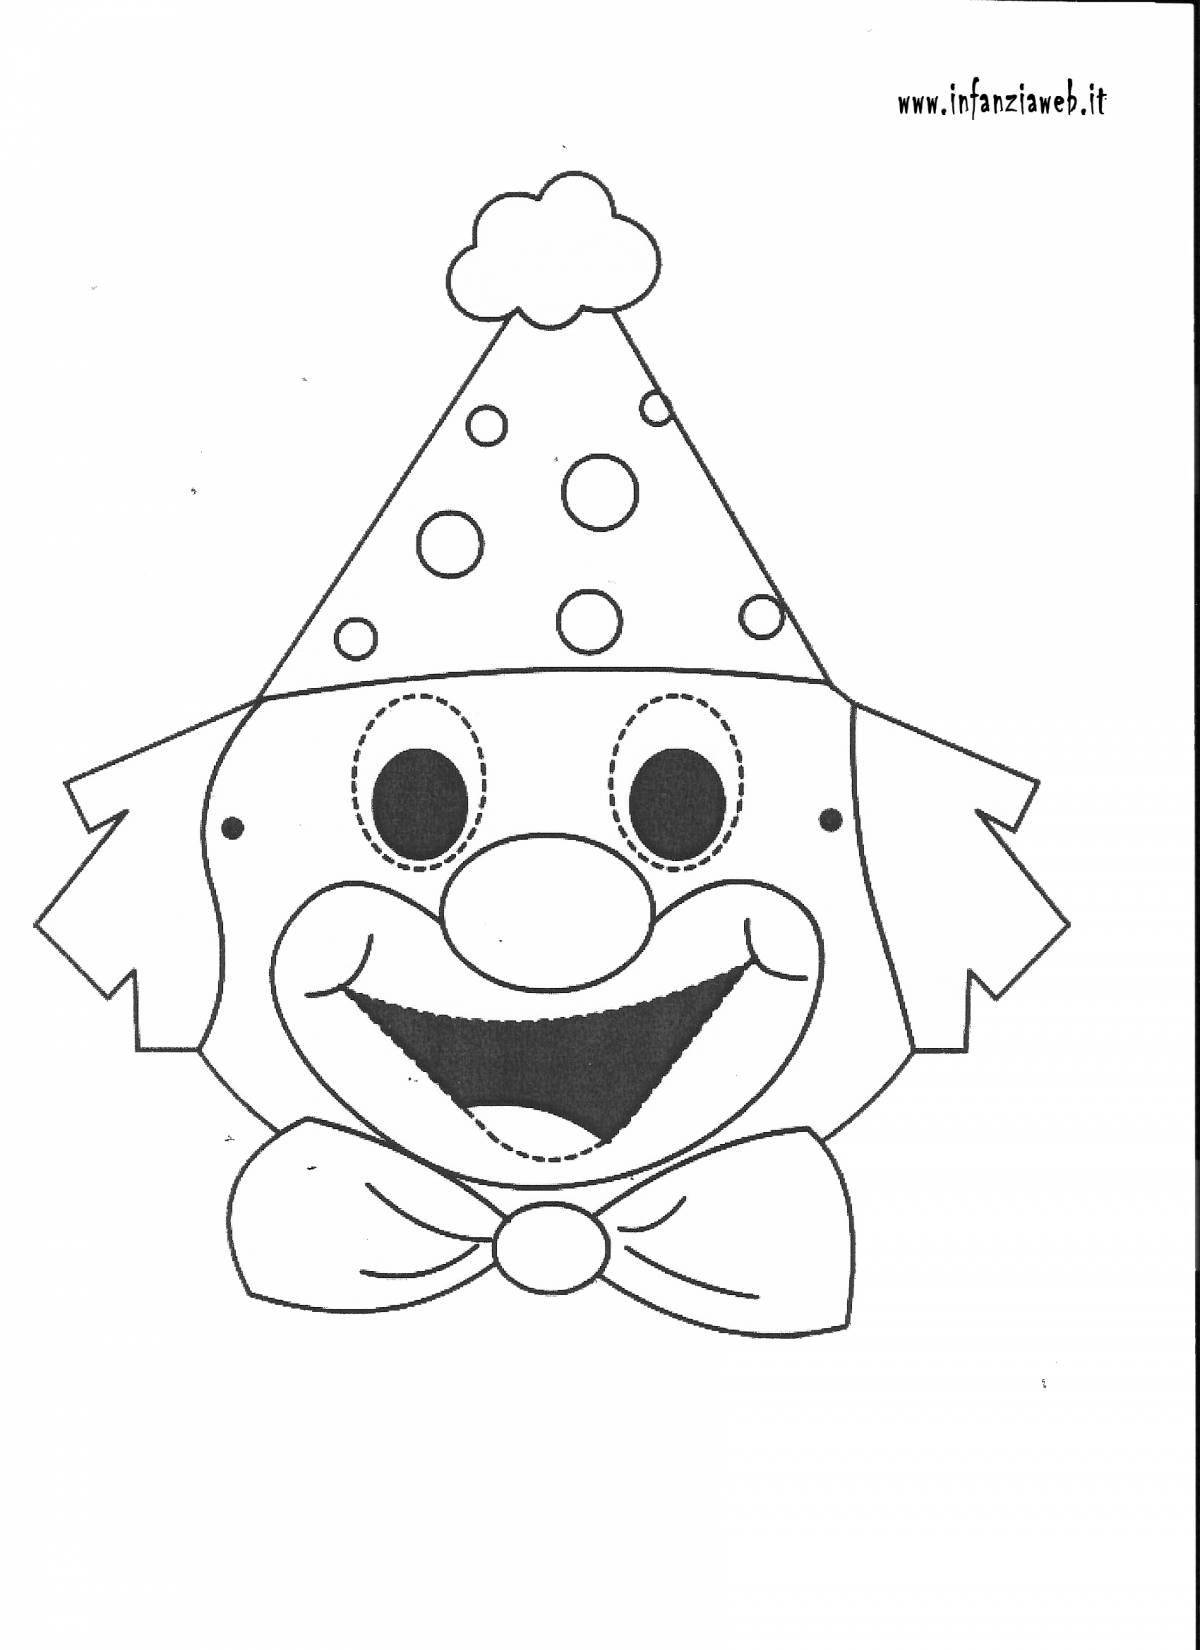 Fabulous clown face coloring page for kids